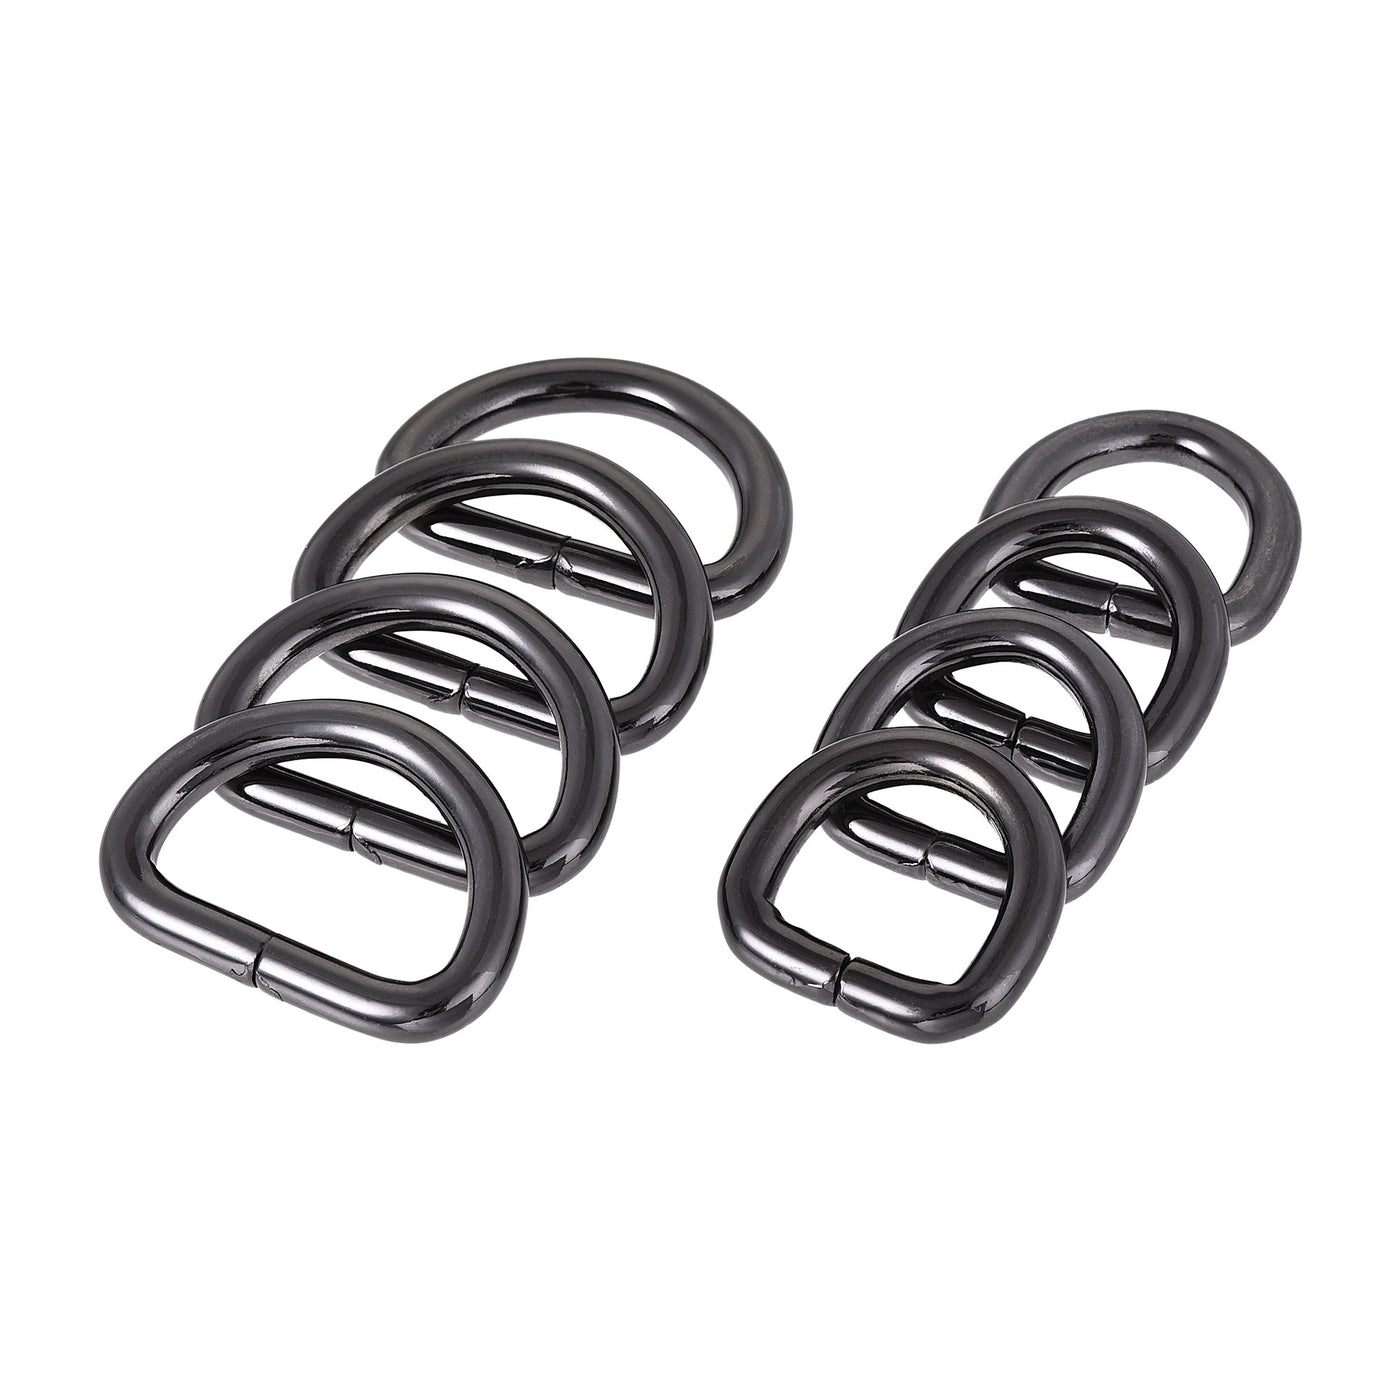 uxcell Uxcell Metal D Ring 0.63"(16mm) 0.98"(25mm) D-Rings Buckle Black, Total 12pcs